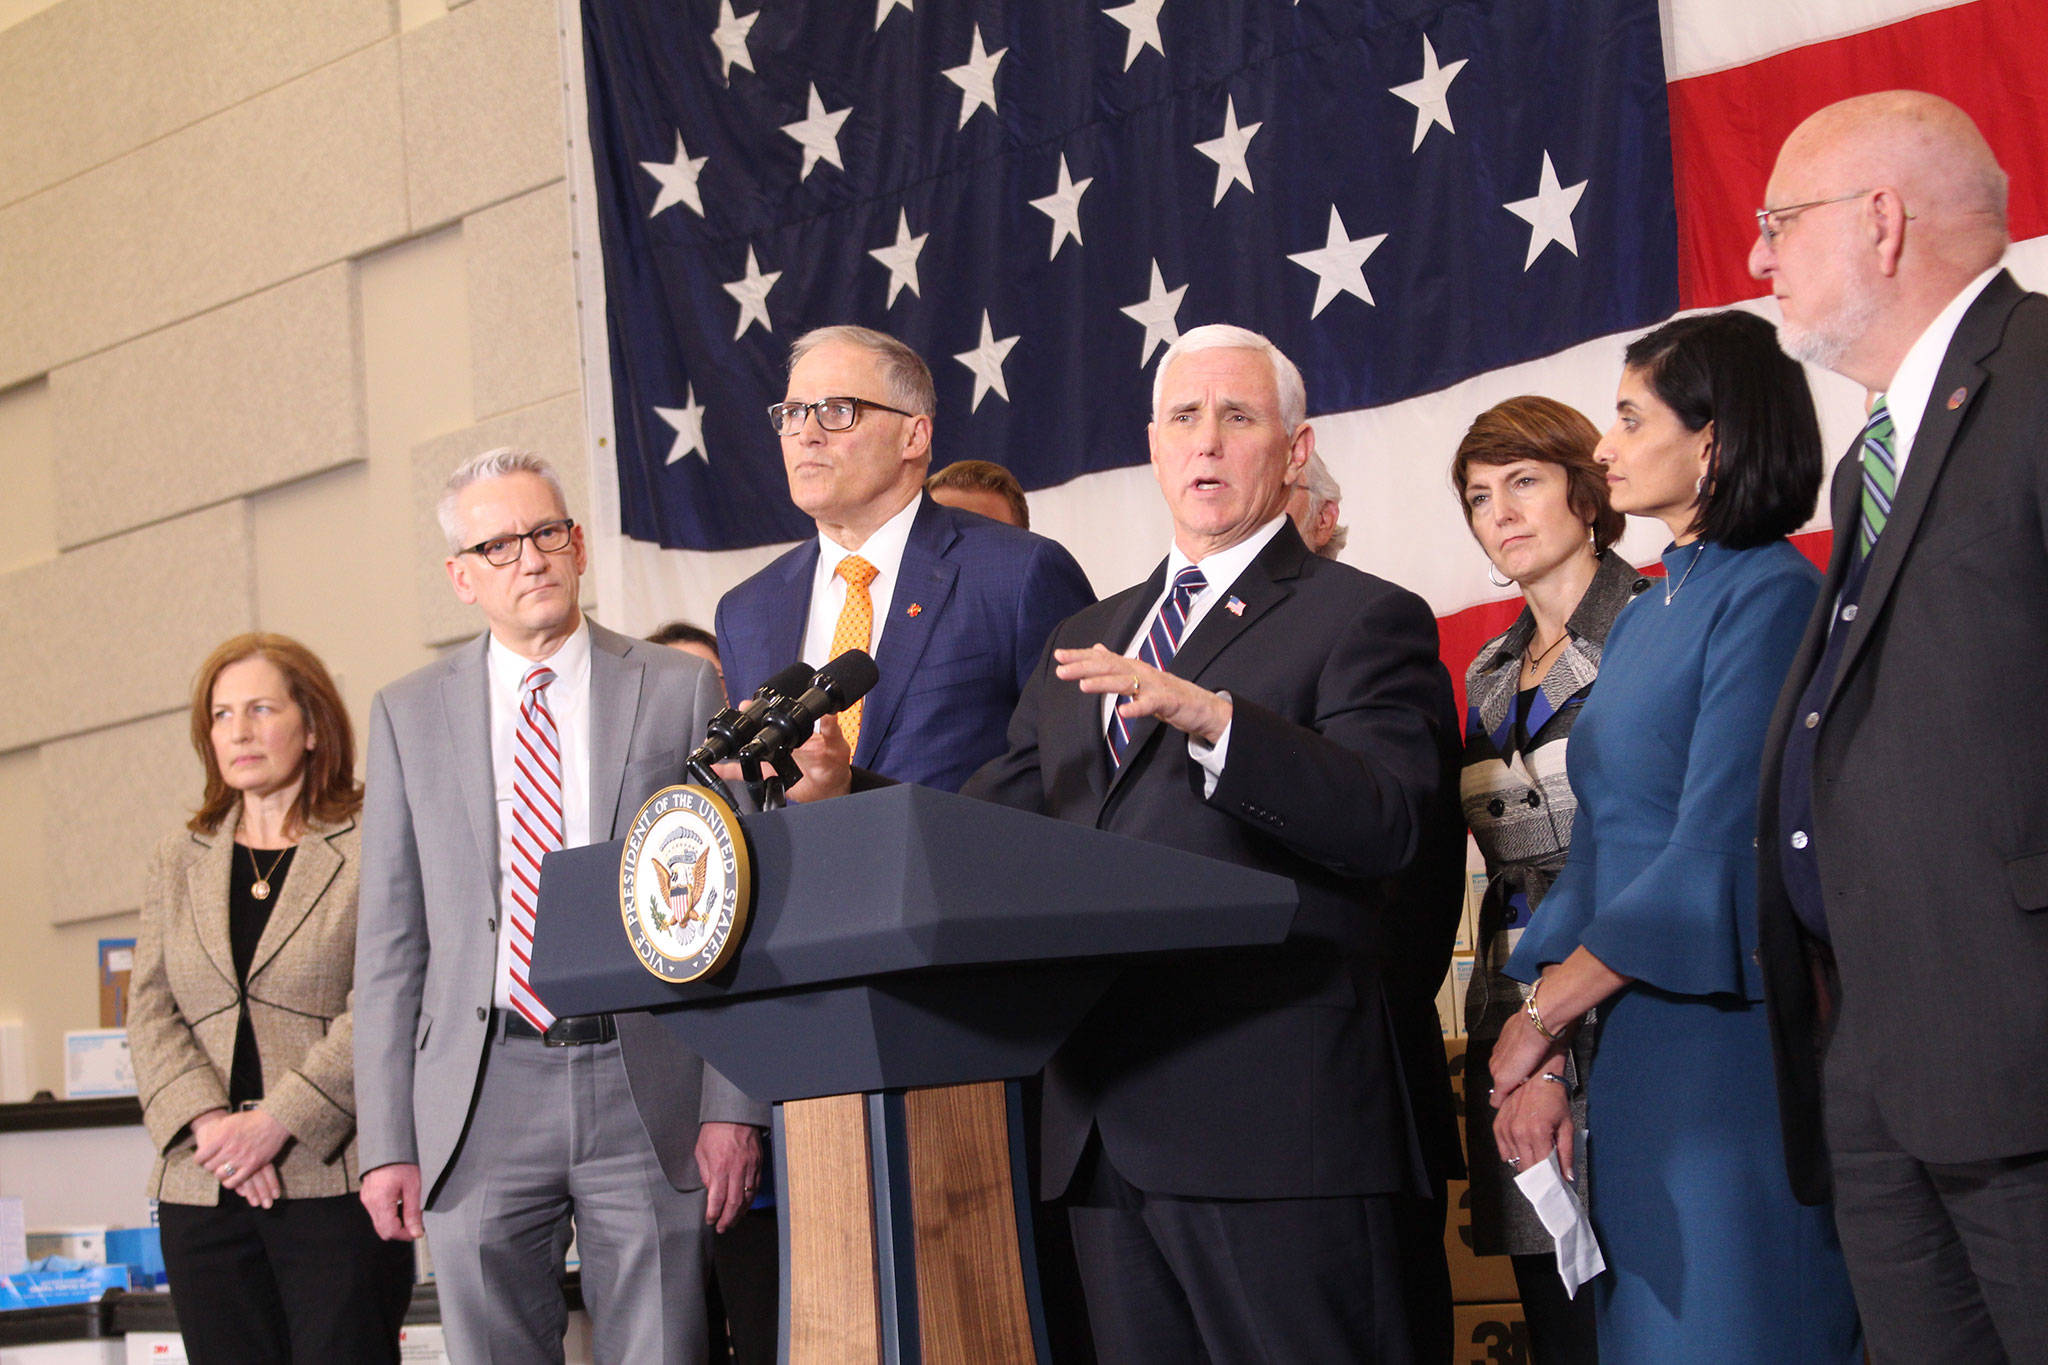 Vice President Mike Pence addresses the coronavirus outbreak situation in Washington after meeting with Governor Jay Inslee and public health officials at Camp Murray. Photo by Cameron Sheppard/WNPA News Bureau